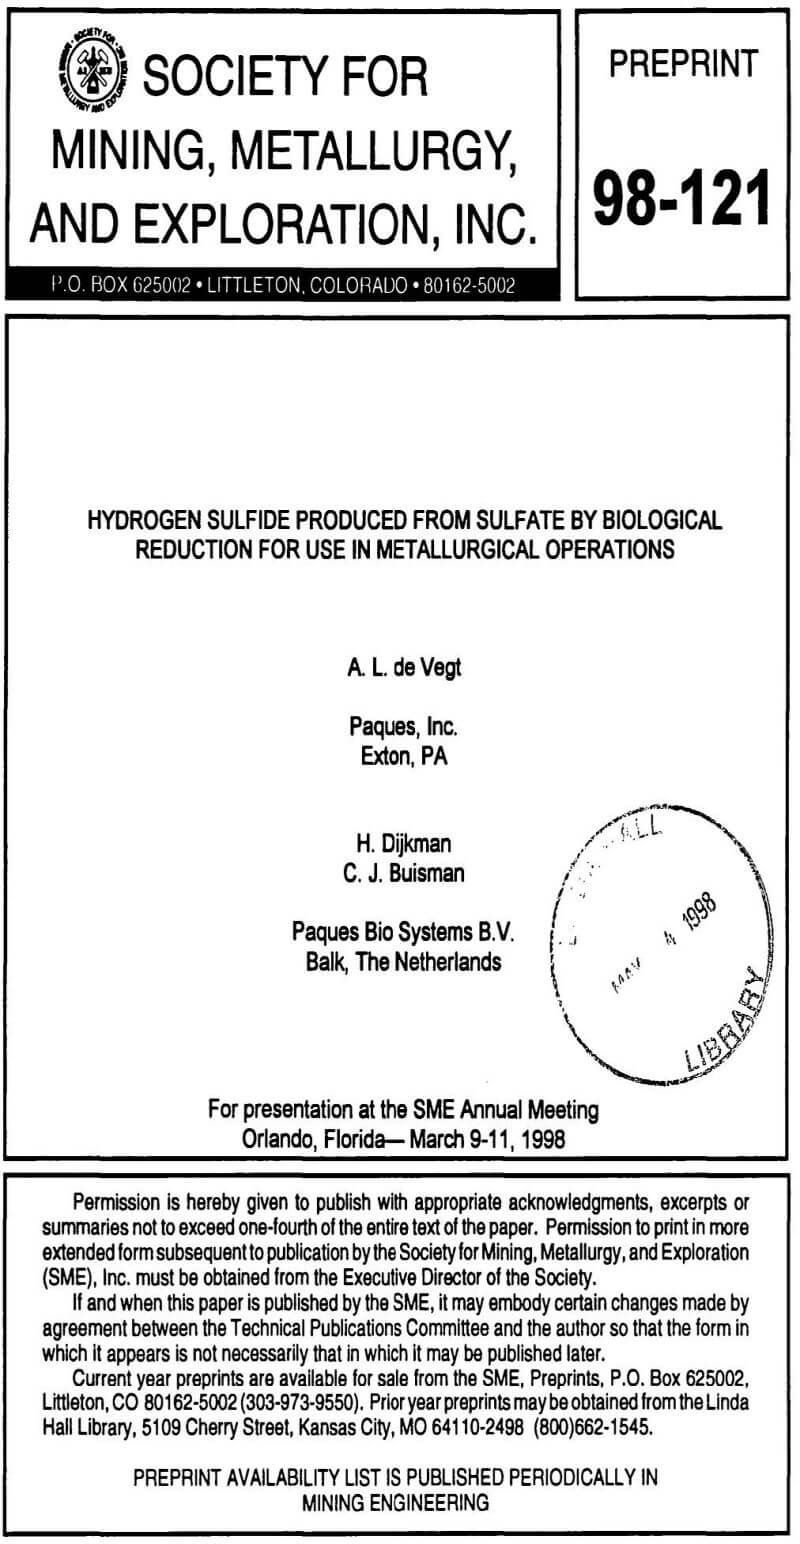 hydrogen sulfide produced from sulfate by biological reduction for use in metallurgical operations